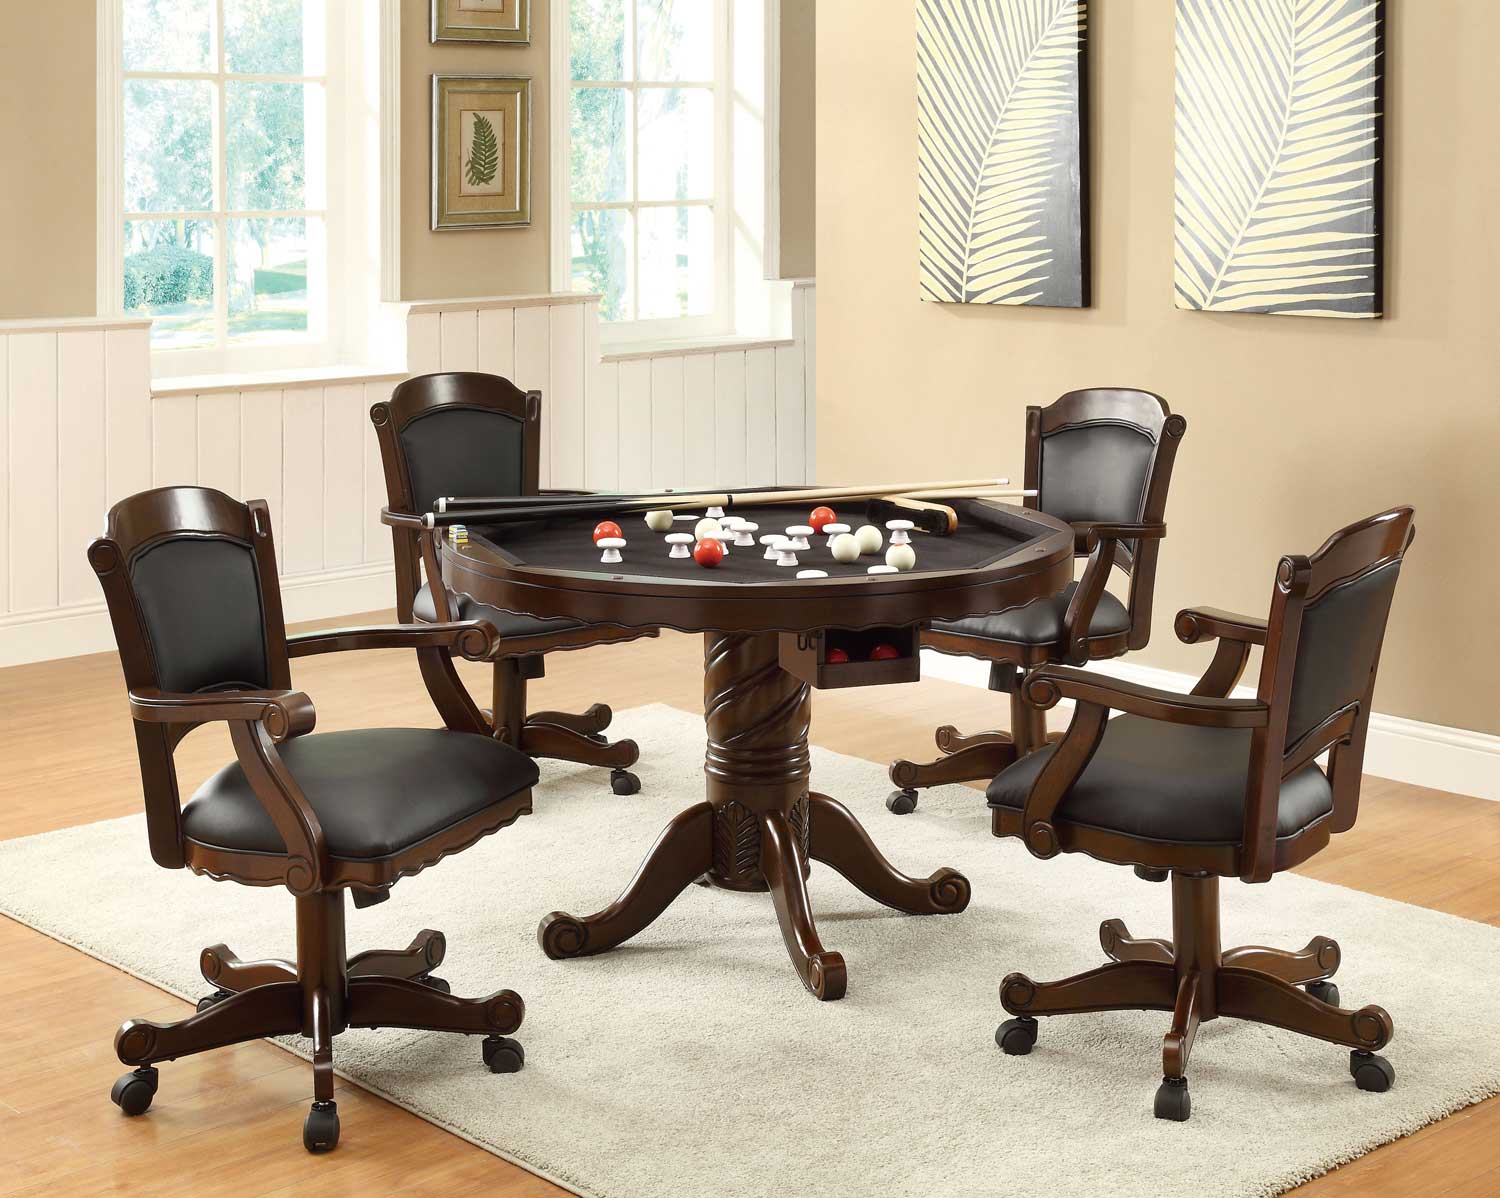 Coaster Turk 3-in-One Game Table Set - Cherry